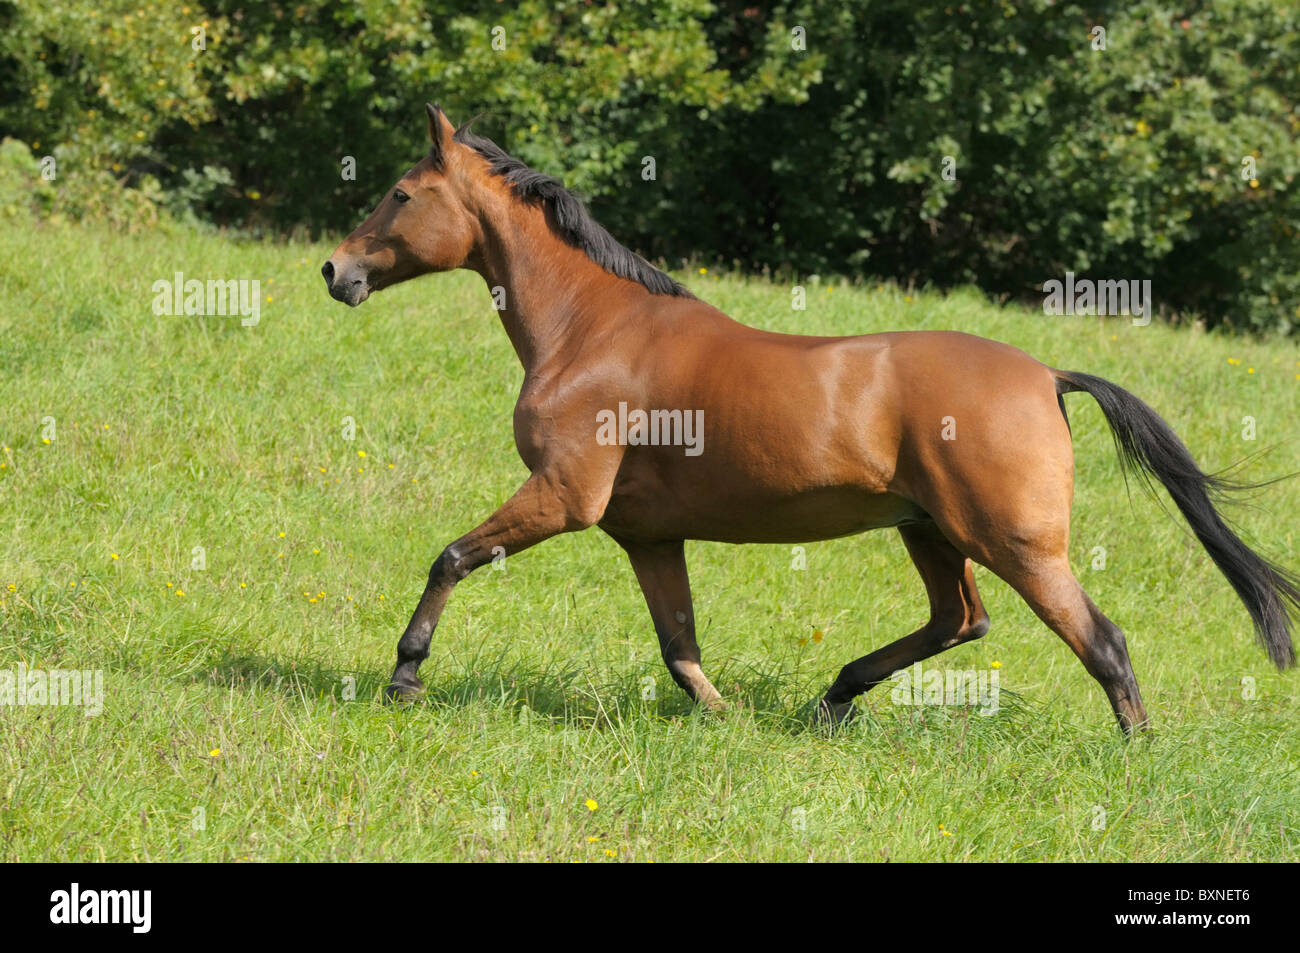 American Standardbred horse trotting in the field Stock Photo